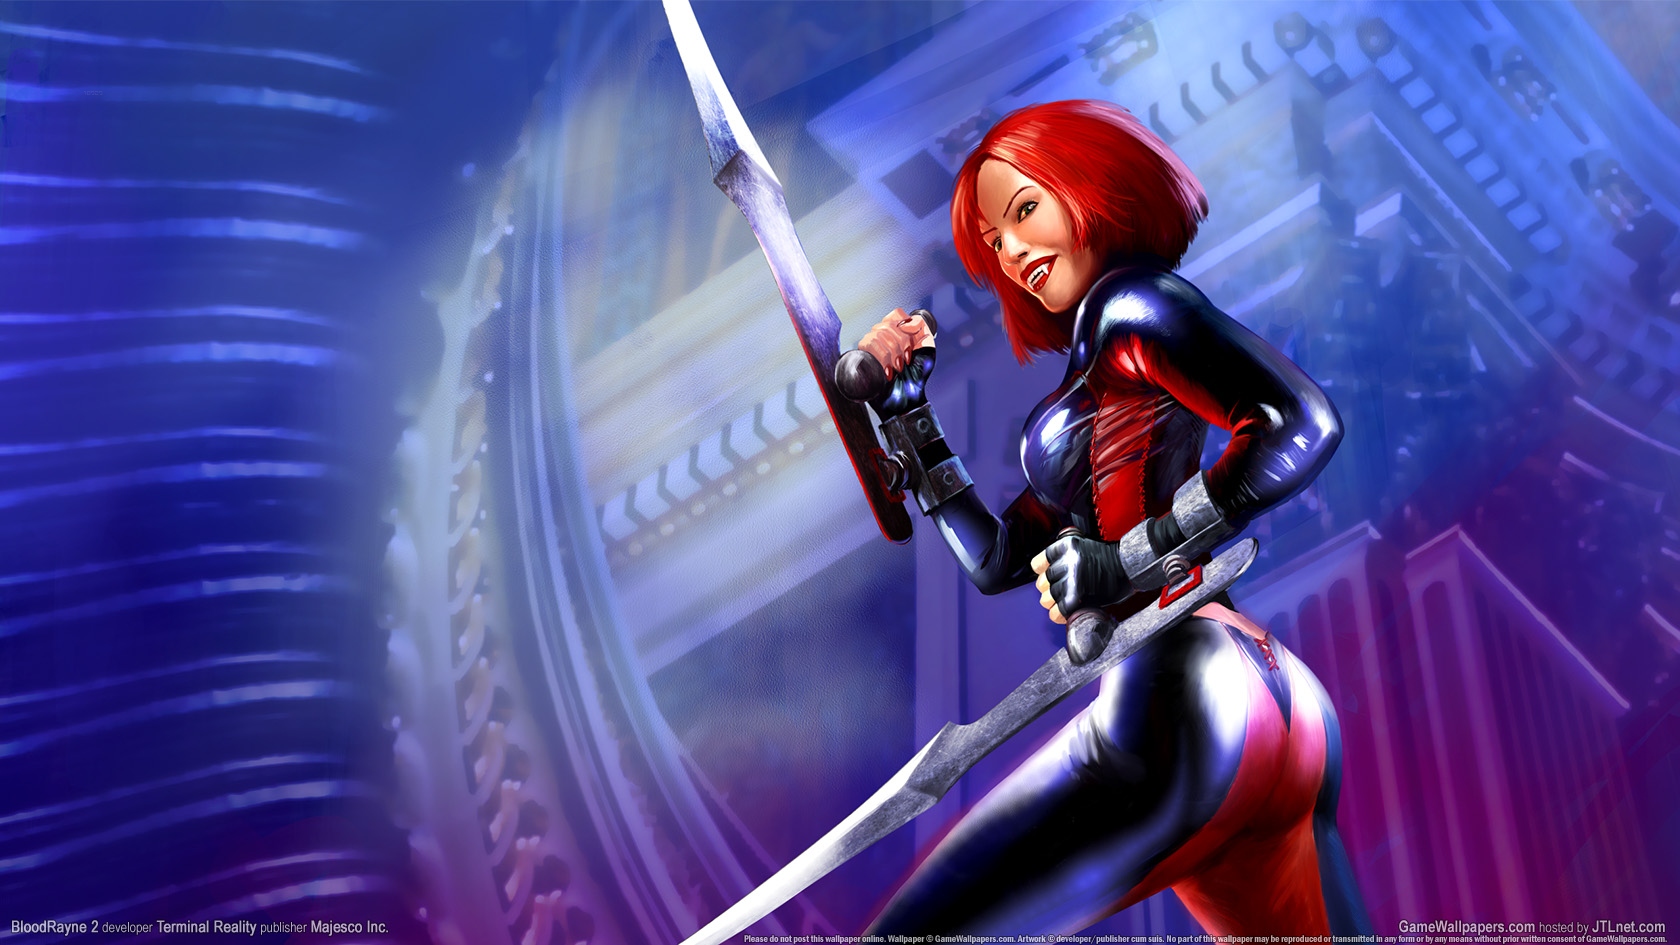 BloodRayne 2 1680x945 wallpaper or background 08